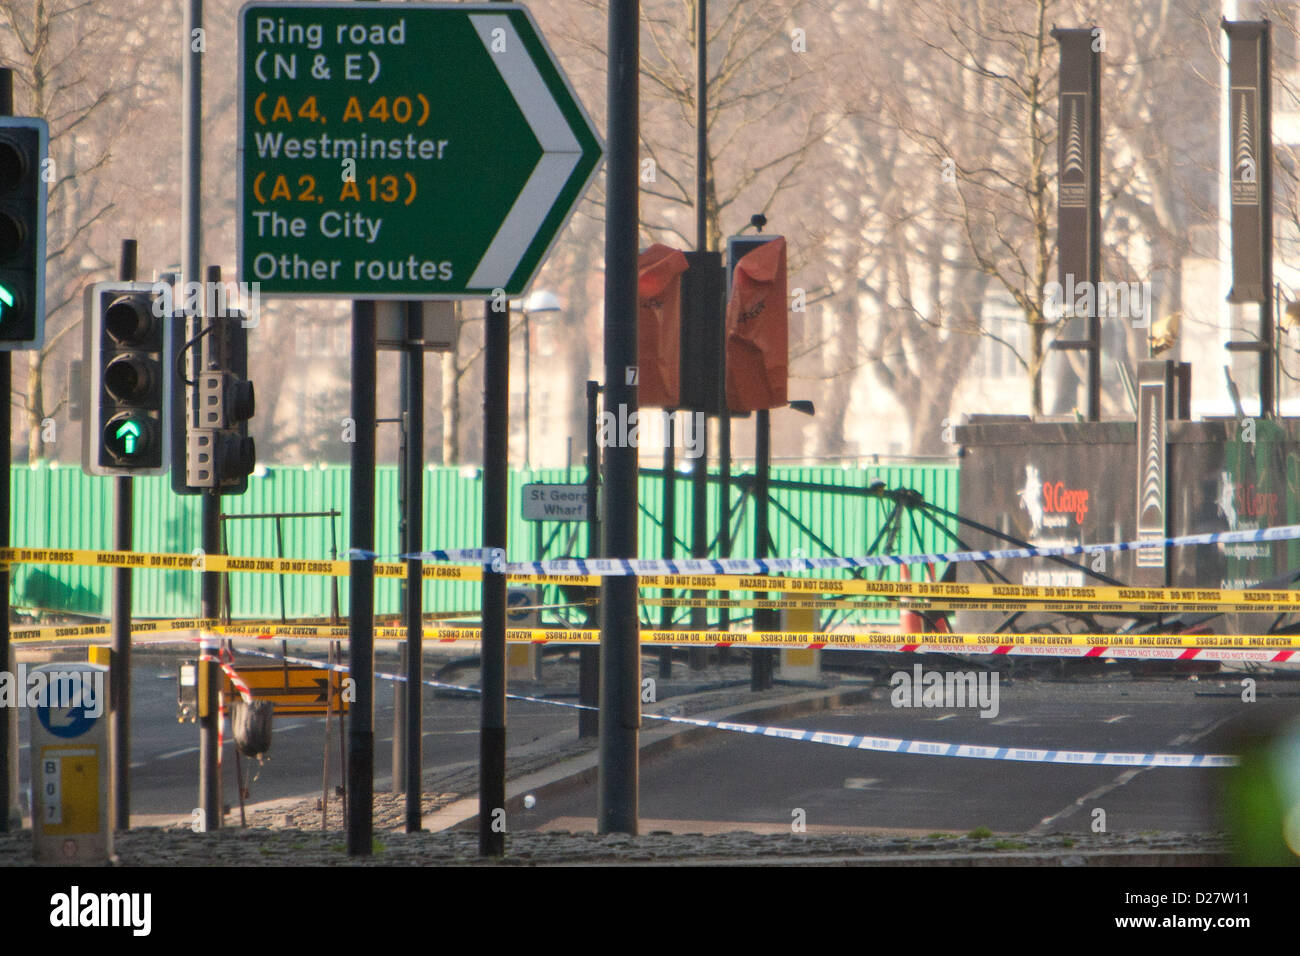 London, UK. 16th January 2013. Part of the crane on St George's Wharf tower that an Agusta 109 helicopter had collided with lies in Wandsworth Road in Vauxhall, London, 16th January 2013. Credit:  martyn wheatley / Alamy Live News Stock Photo